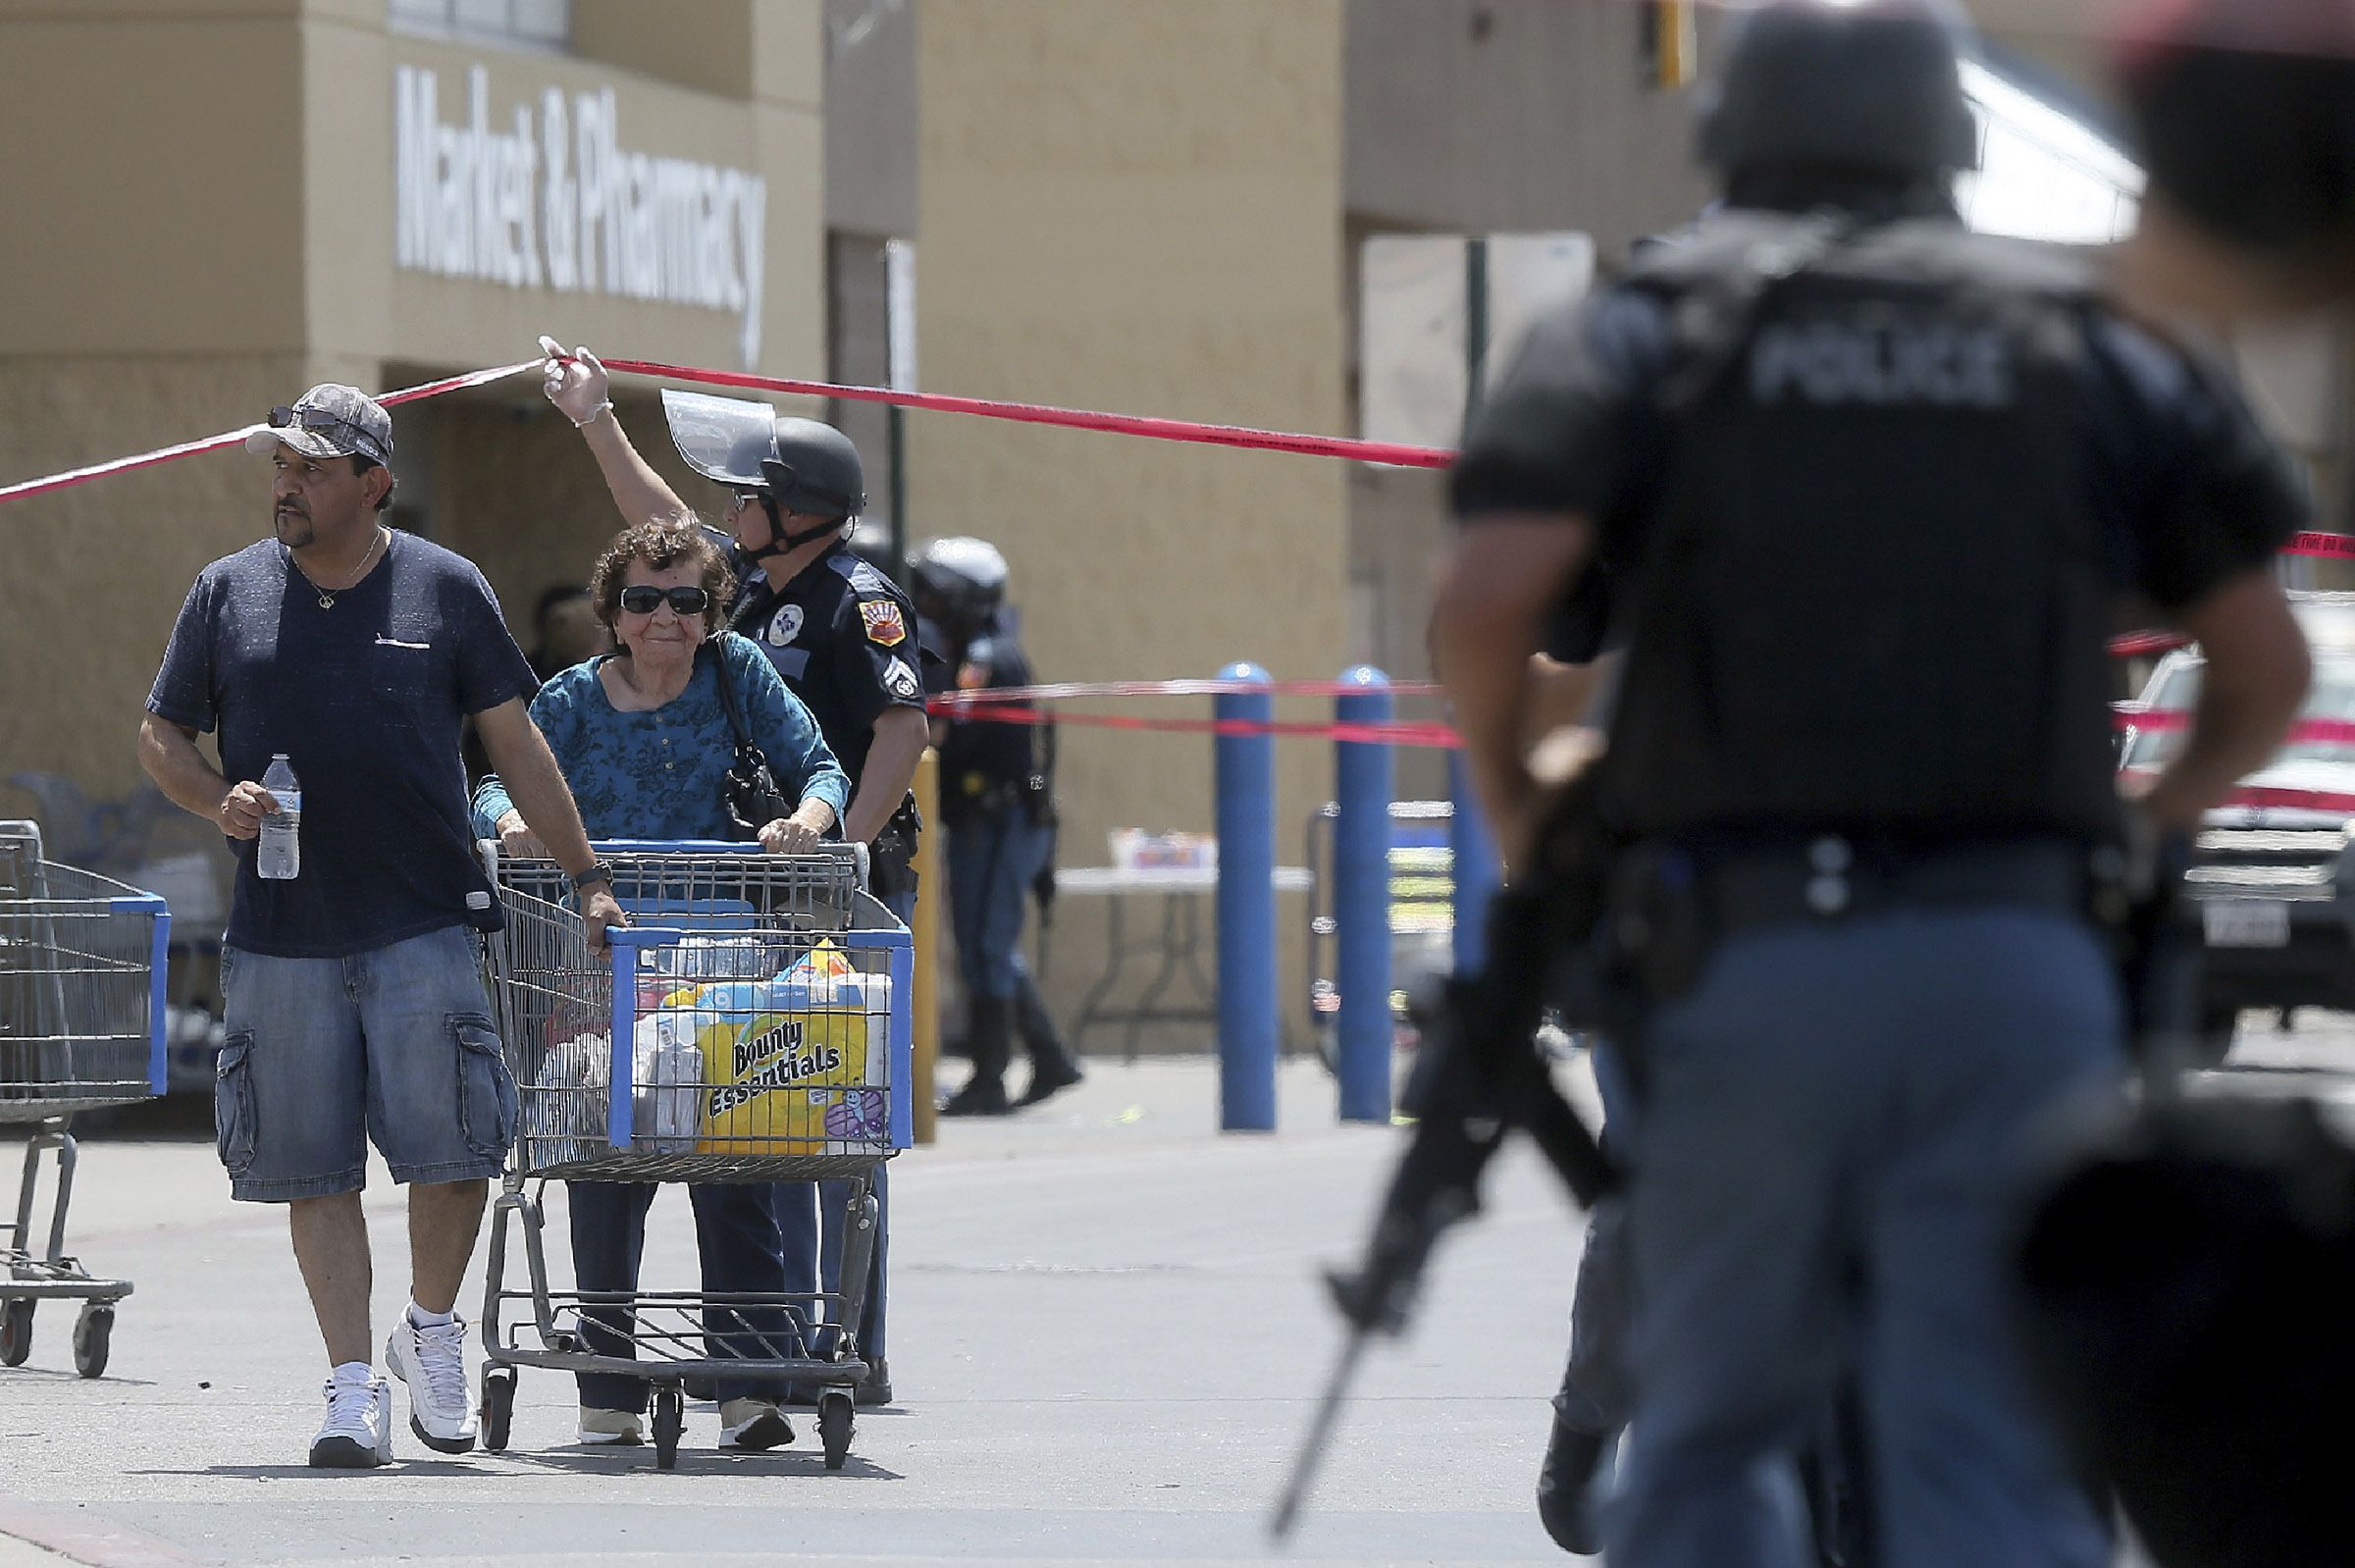 Walmart customers are escorted from the store after a gunman opened fire on shoppers near the Cielo Vista Mall